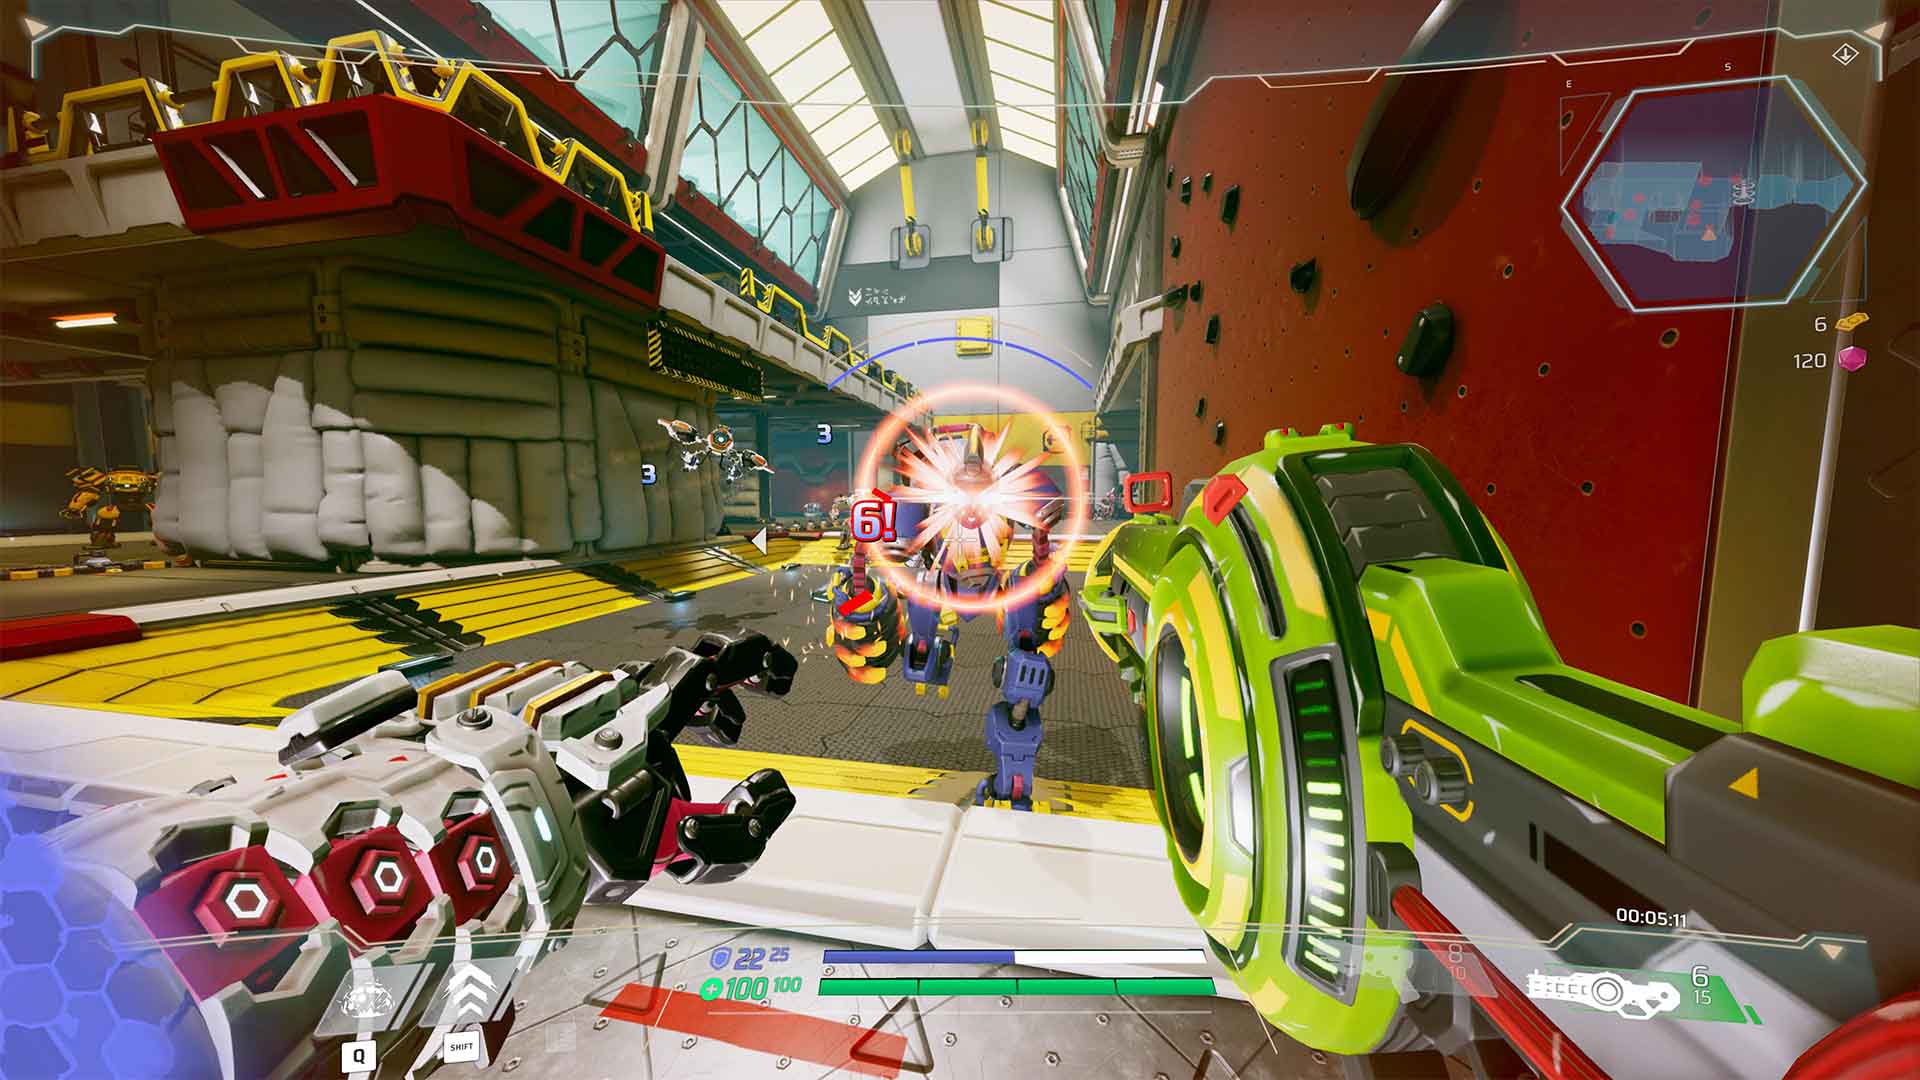 Machines Arena Launches with Early Access Pass on Steam